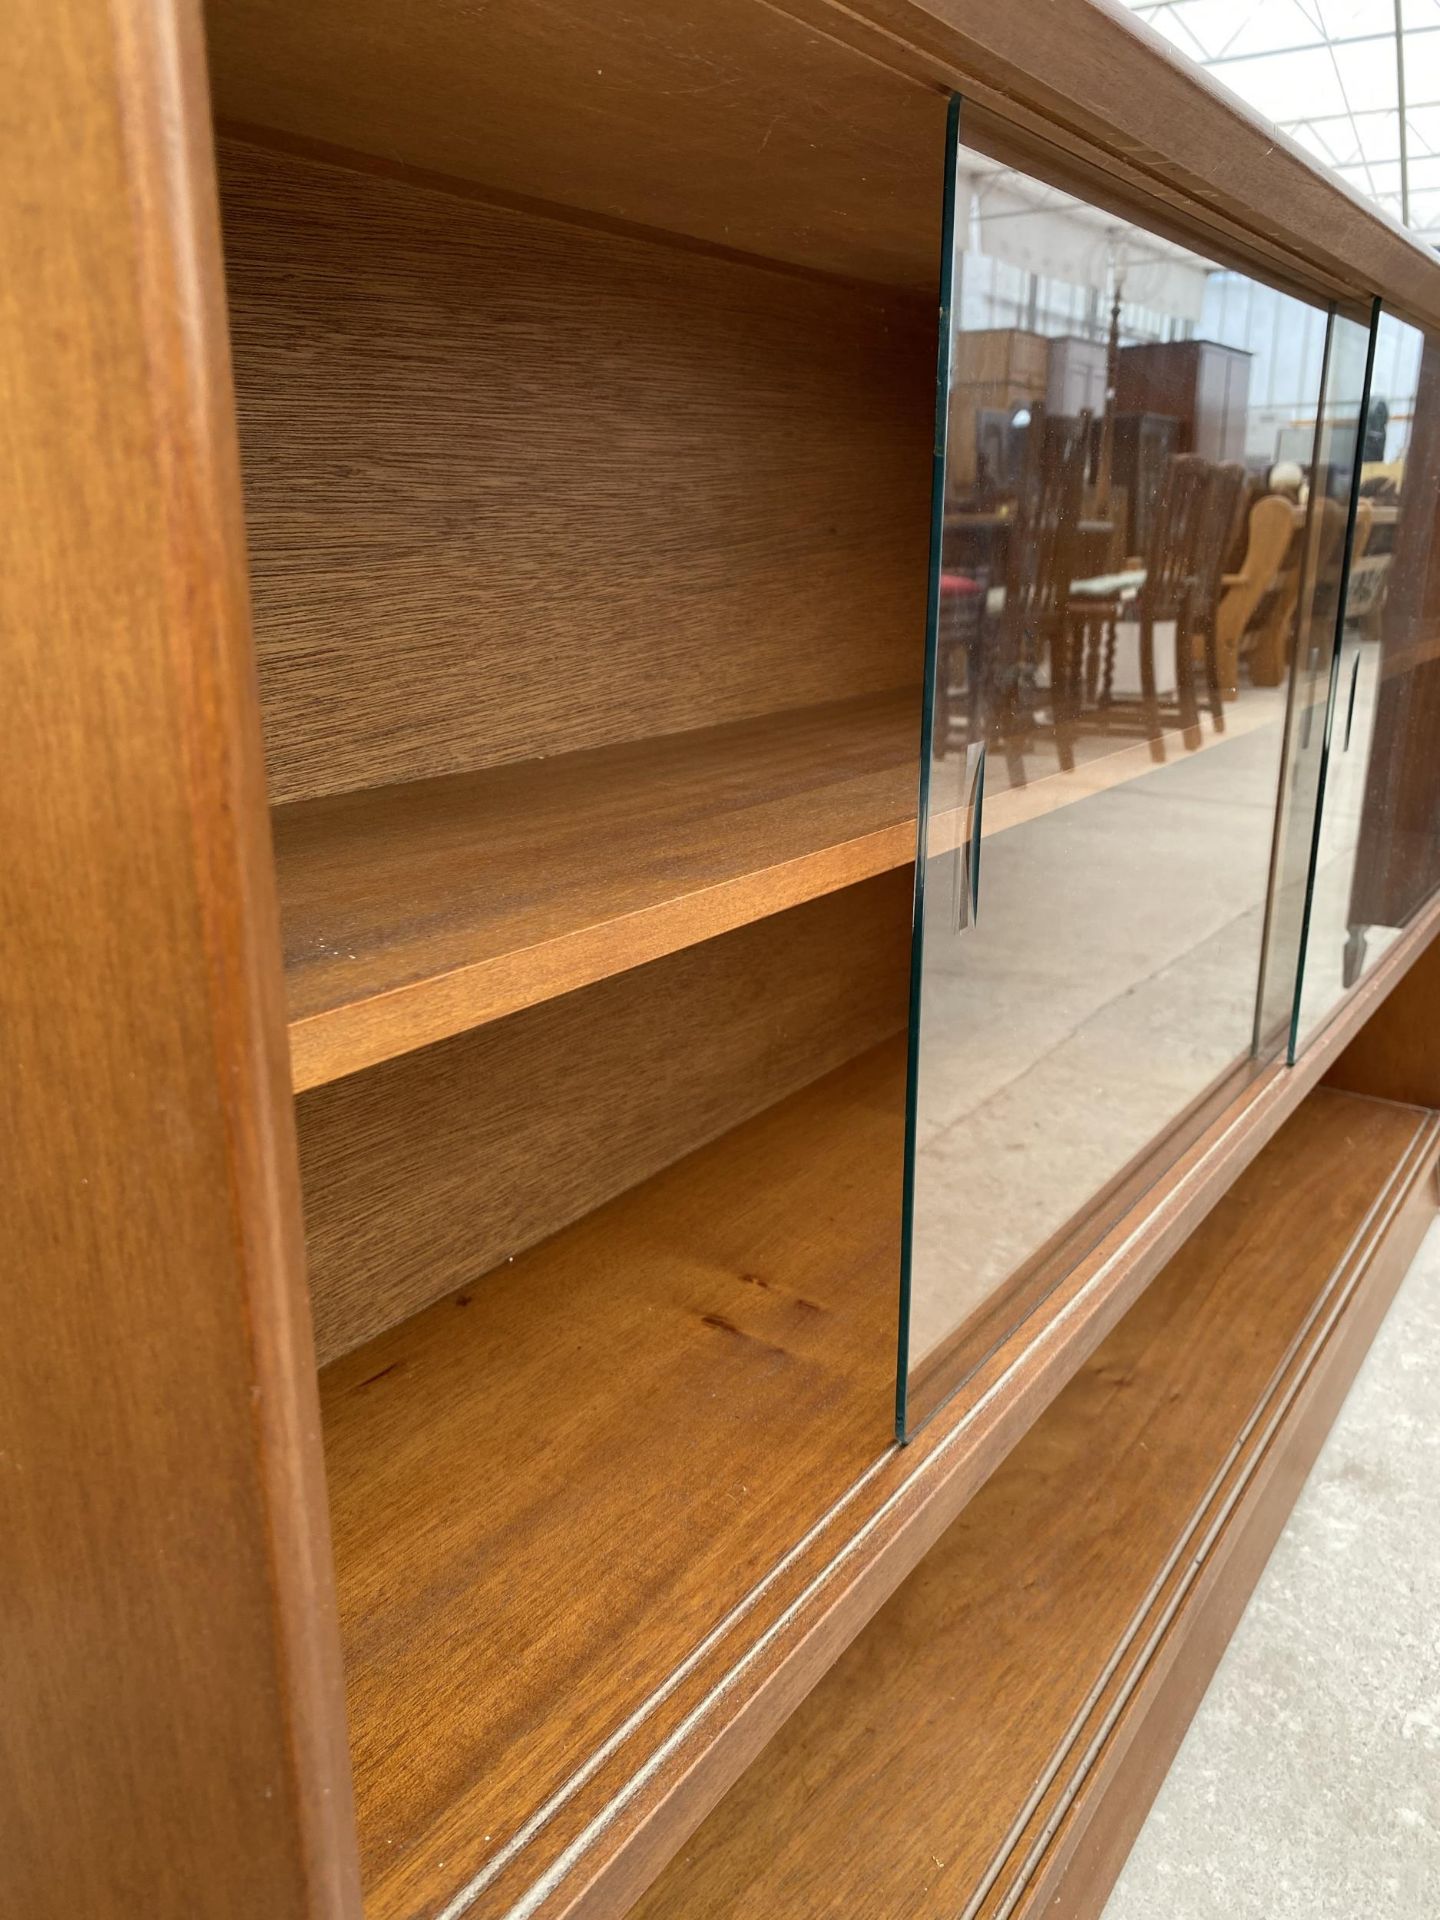 A RETRO TEAK HERBENT AND GIBBS GLASS FRAMED BOOKCASE 60" WIDE - Image 5 of 6